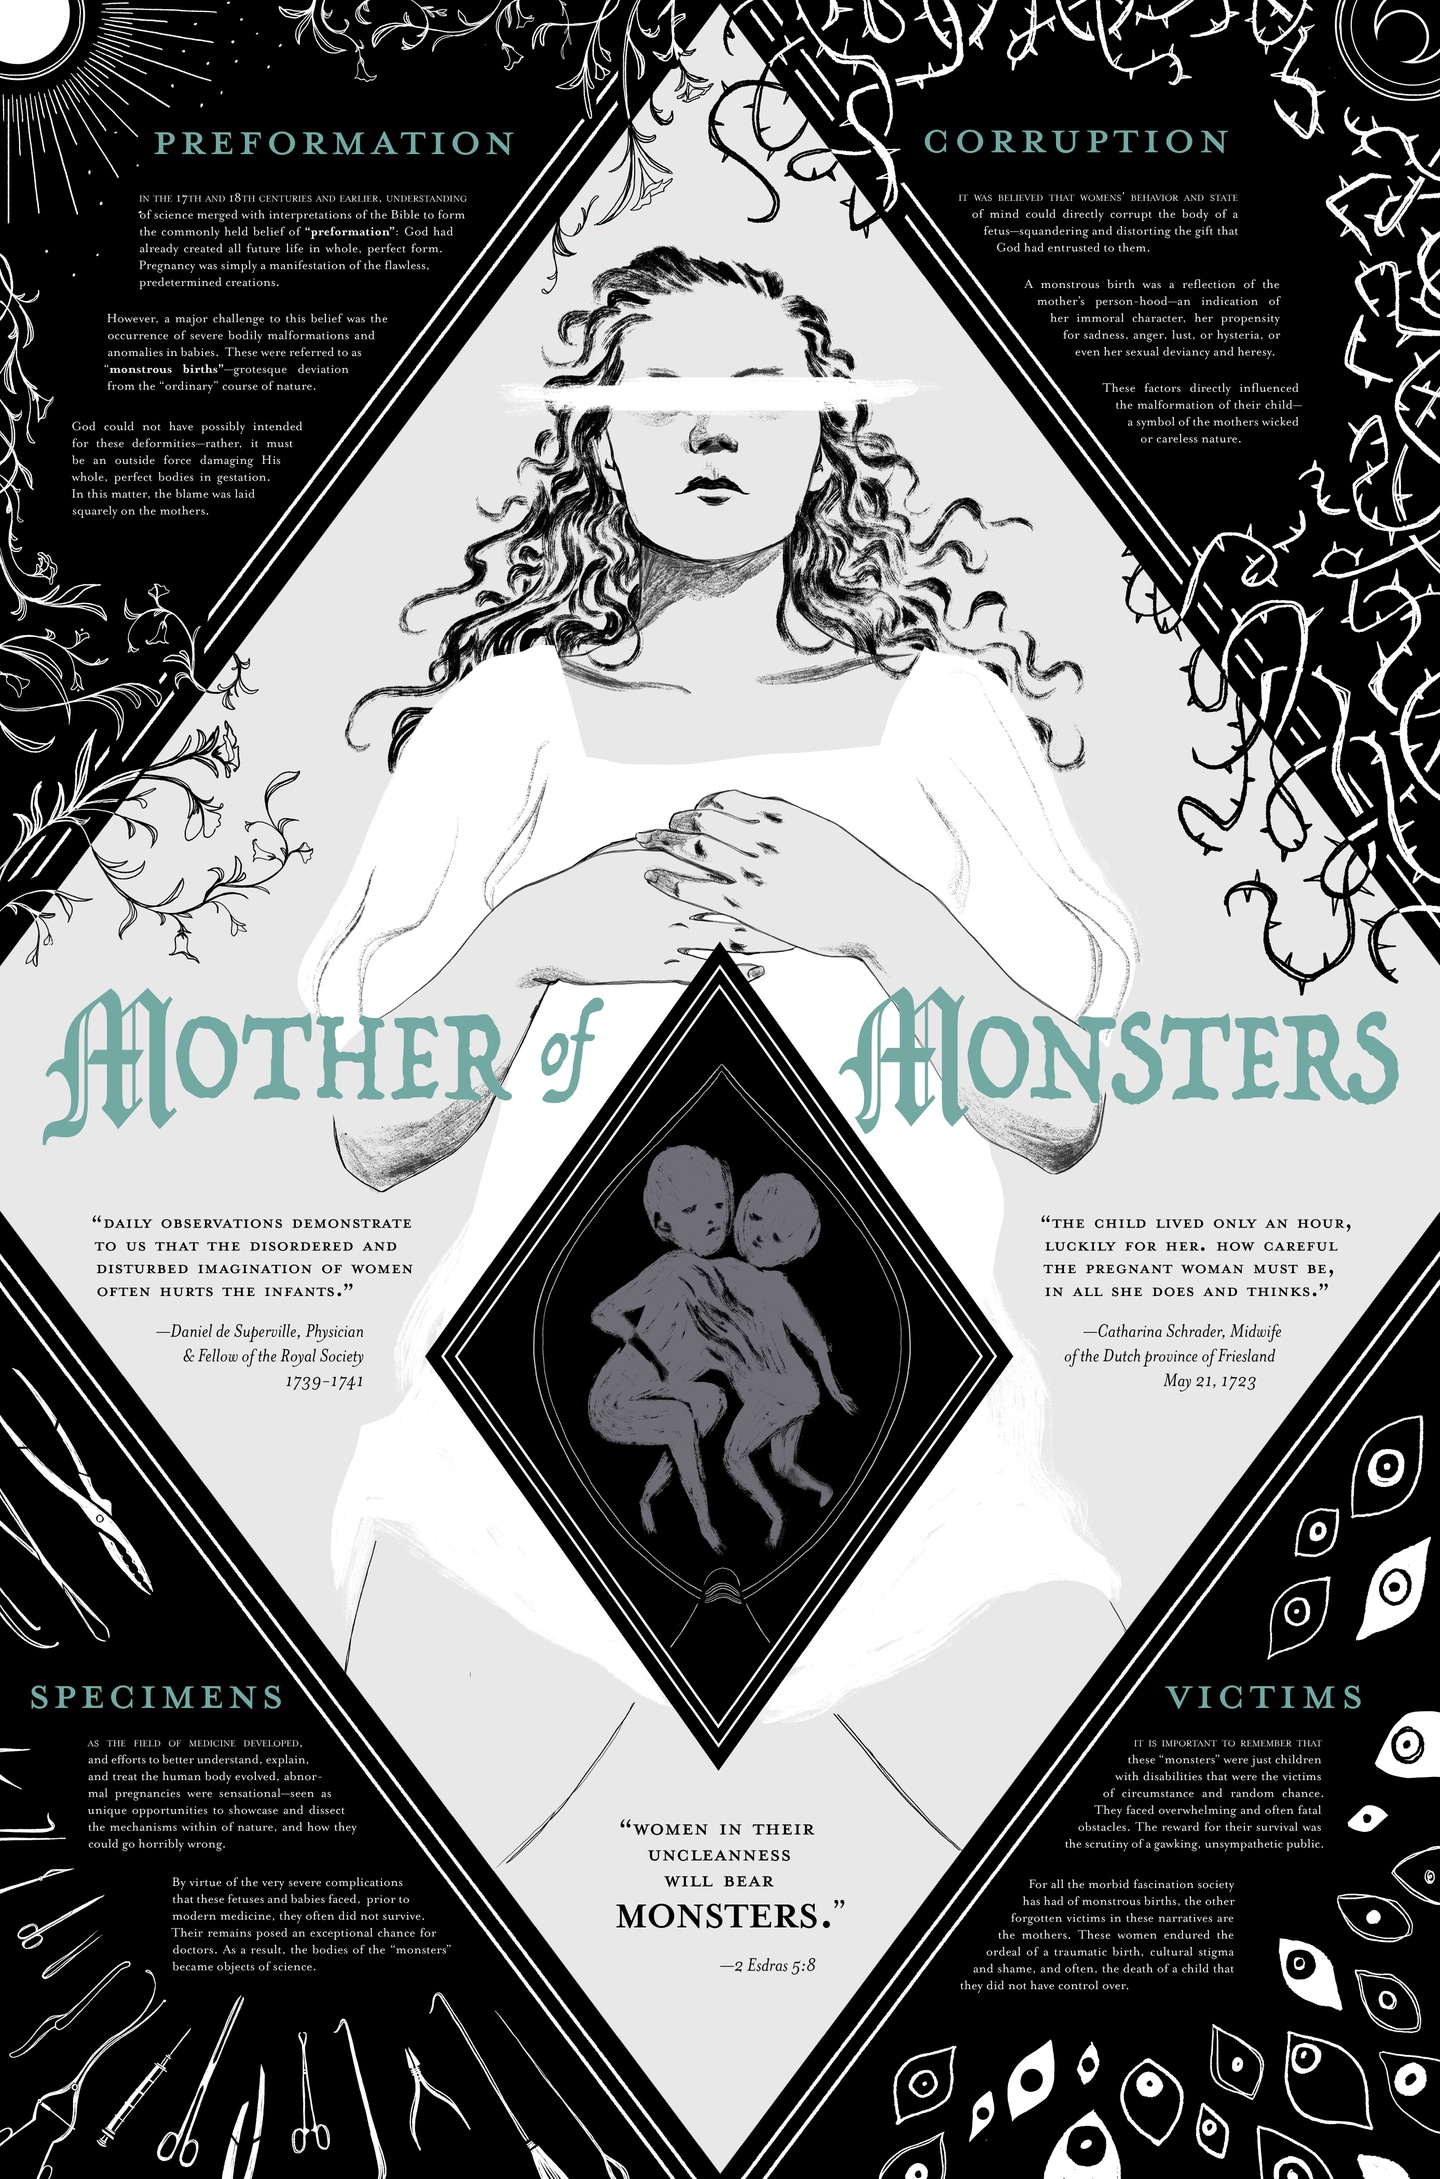 Poster of 'Mother of Monsters' with an illustration of a lady in a white dress with her eyes crossed out with conjoined twins illustrated in front of her